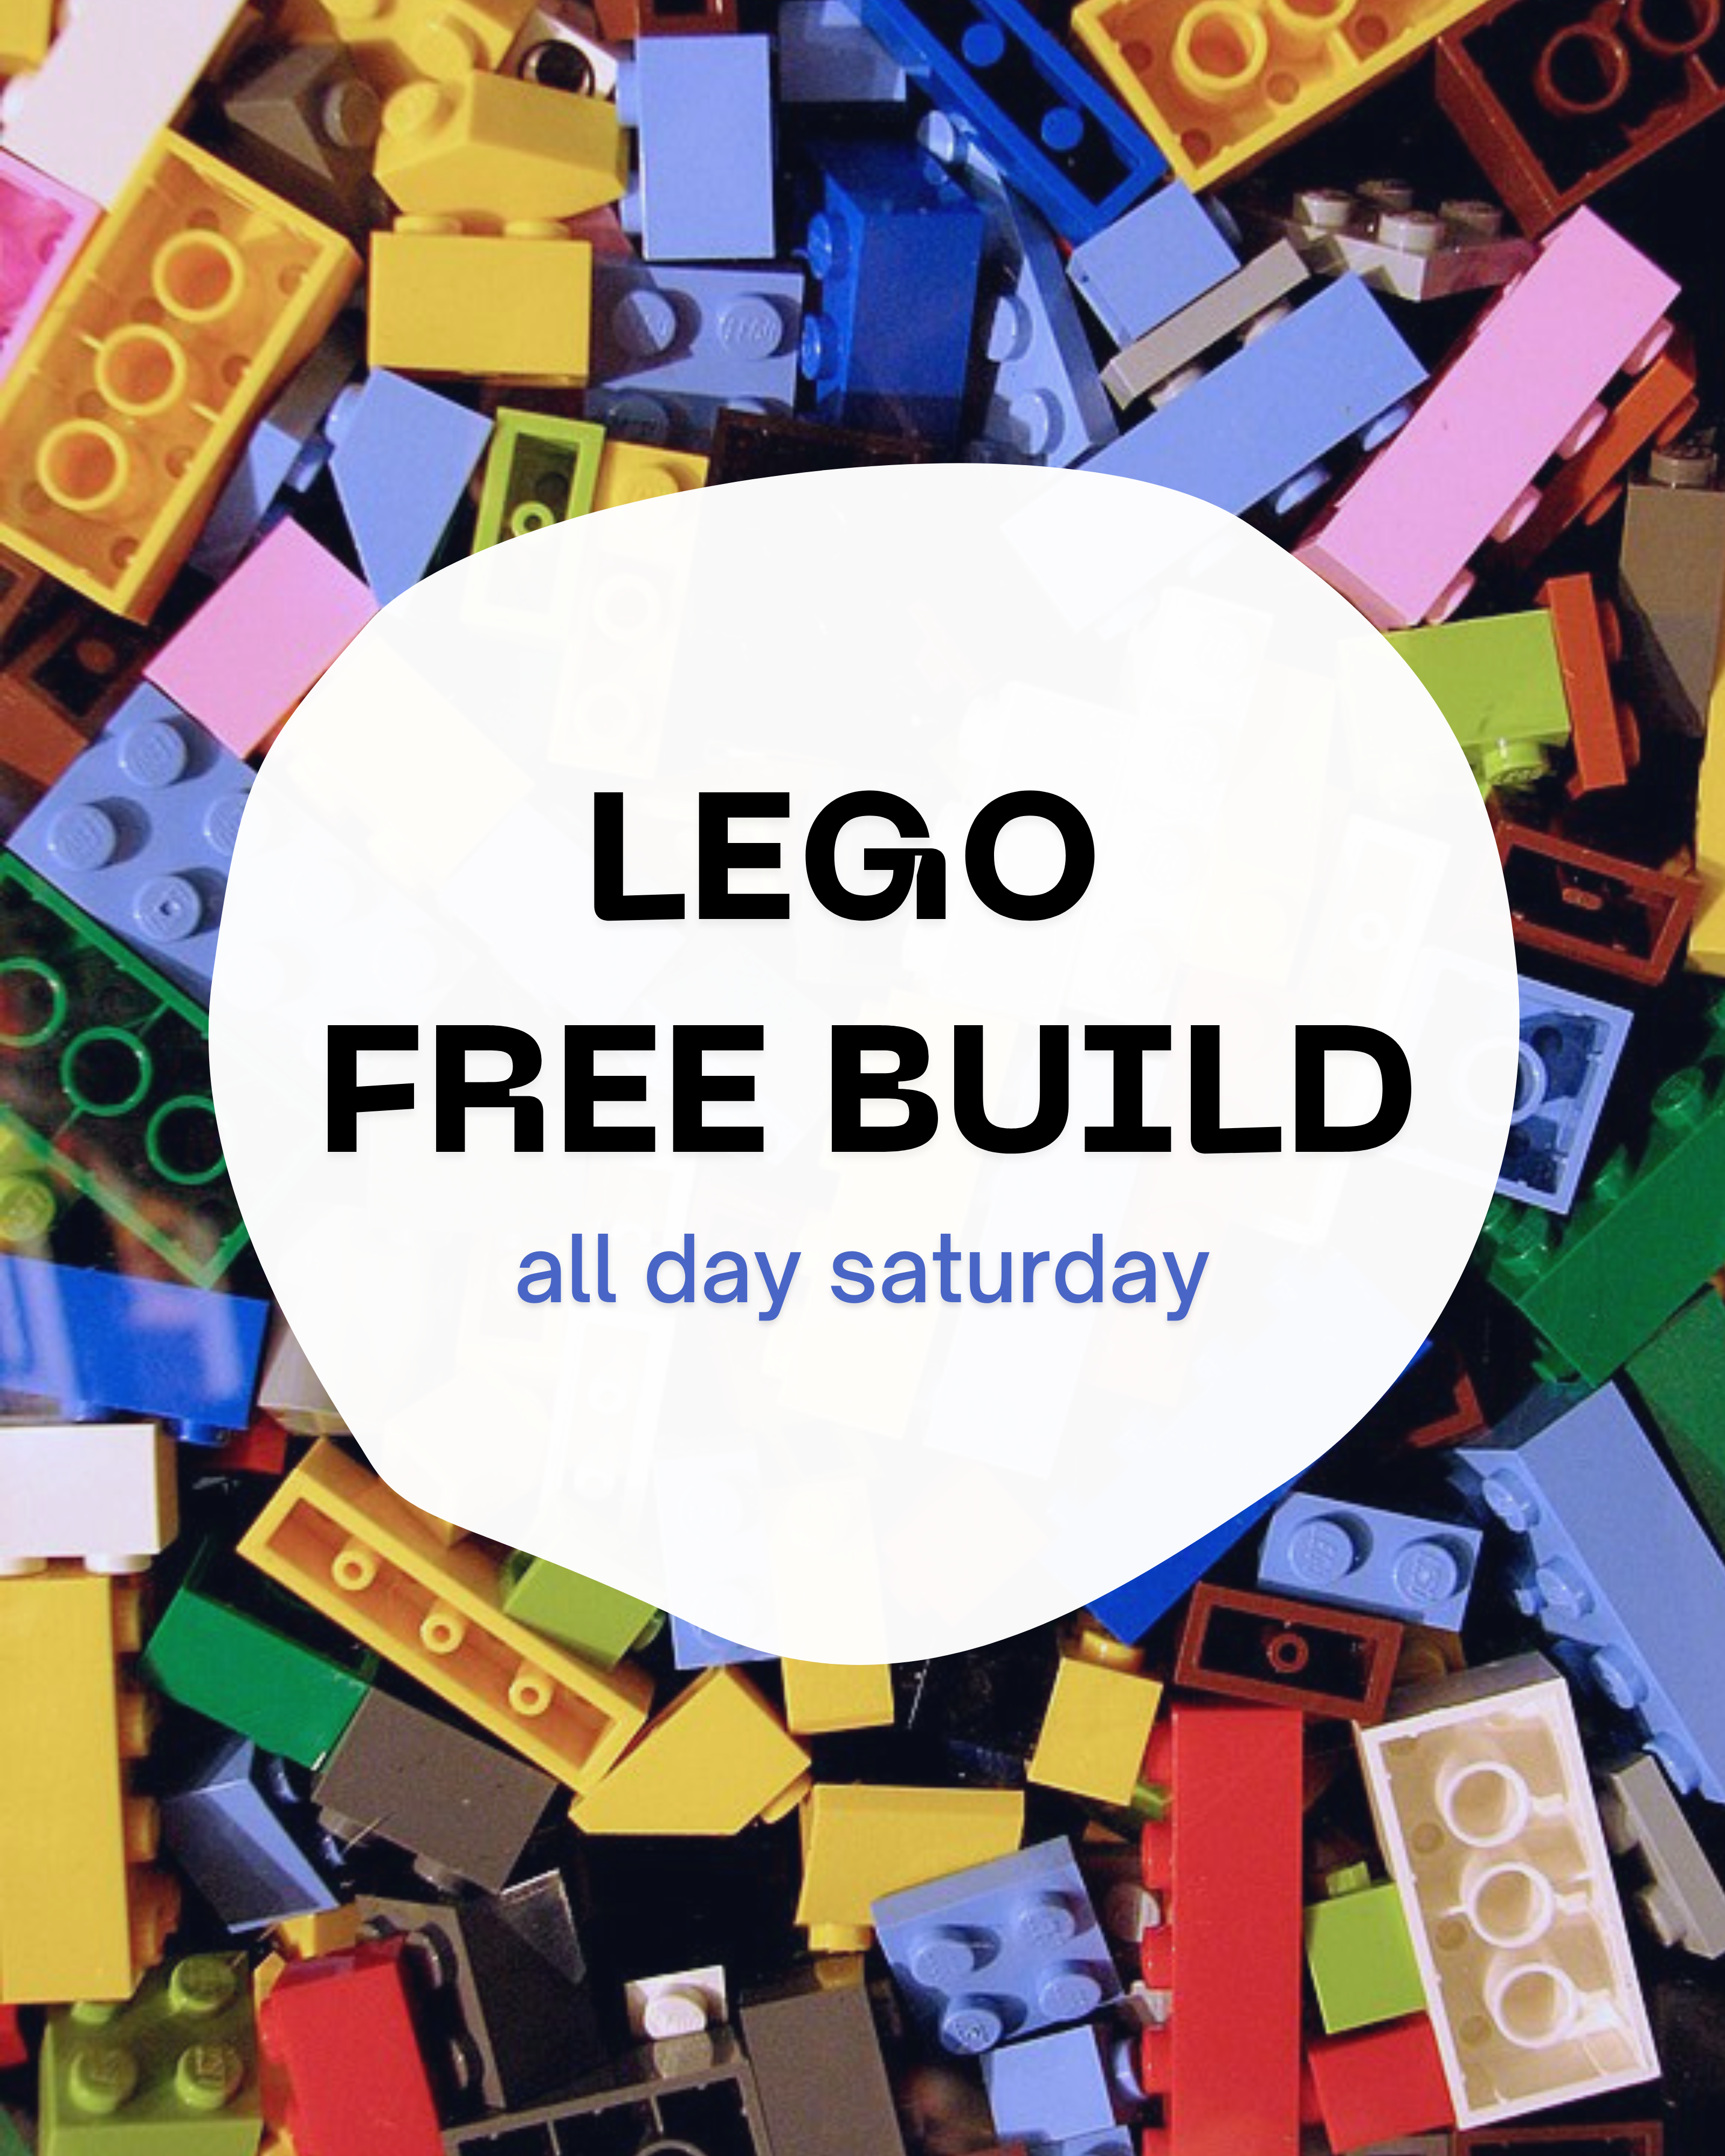 Text-based image reading: LEGO FREE BUILD all day Saturday